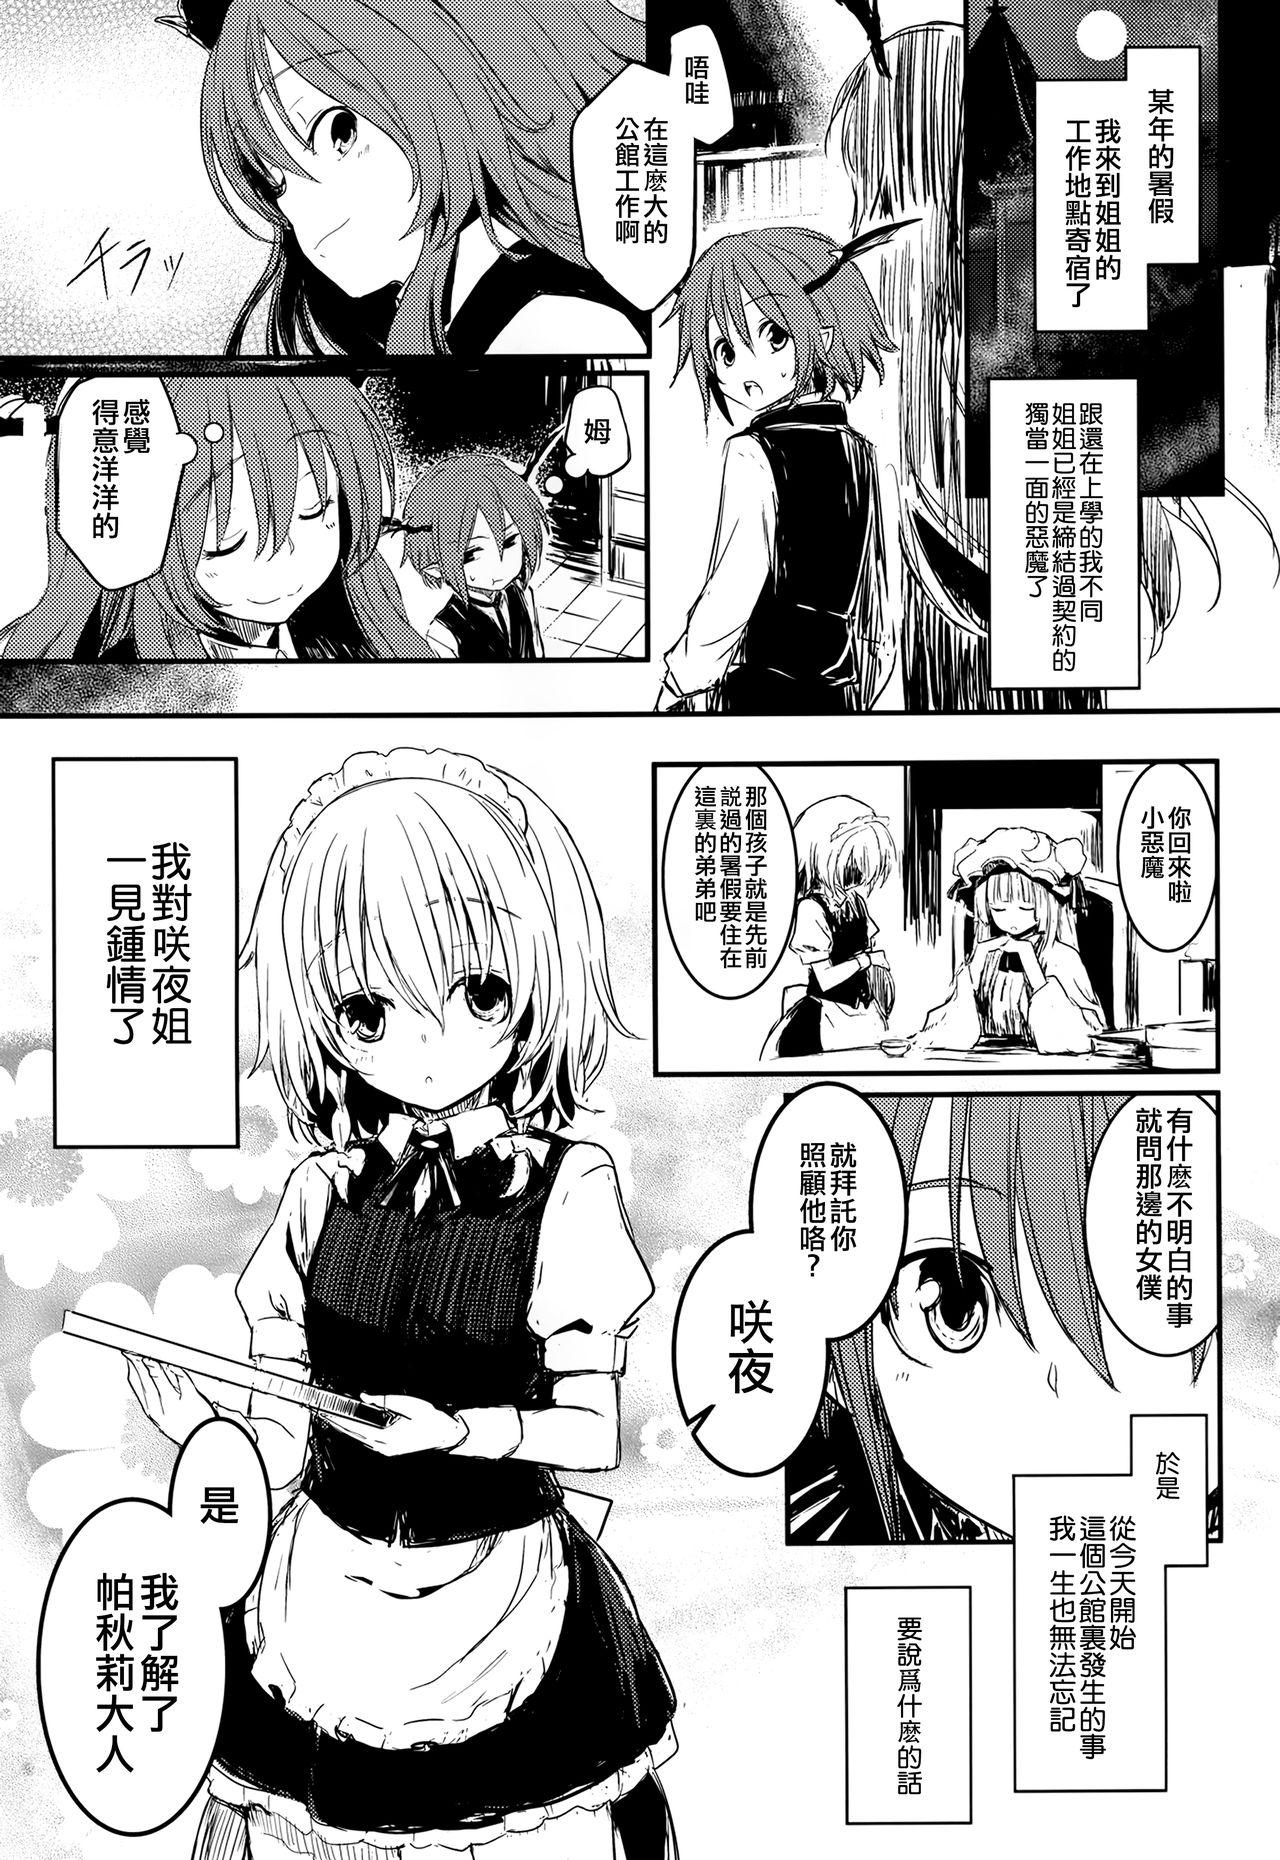 Outdoor Sex Fushigi na Maid to Library - Touhou project Milk - Page 3